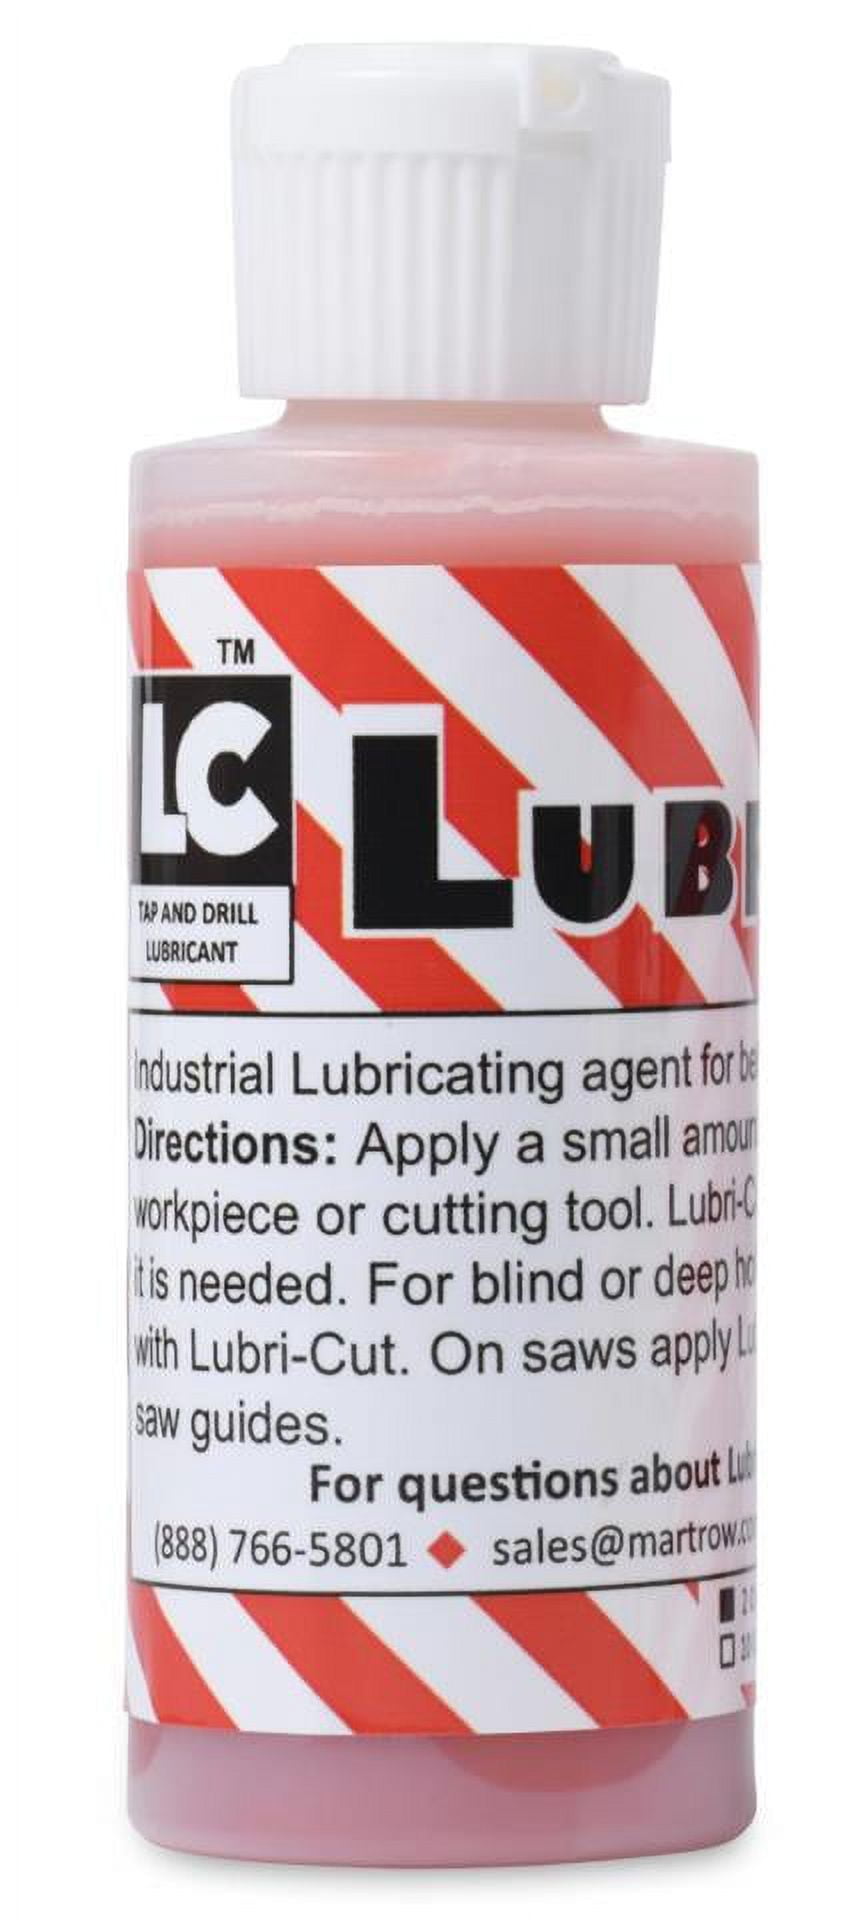 Cutting Oil, Cutting Fluid 8-oz, Made in The USA | Cutting Oil for Drilling, Tapping, Milling | Professional Grade Fluid Oil - Machine Cutting Fluid